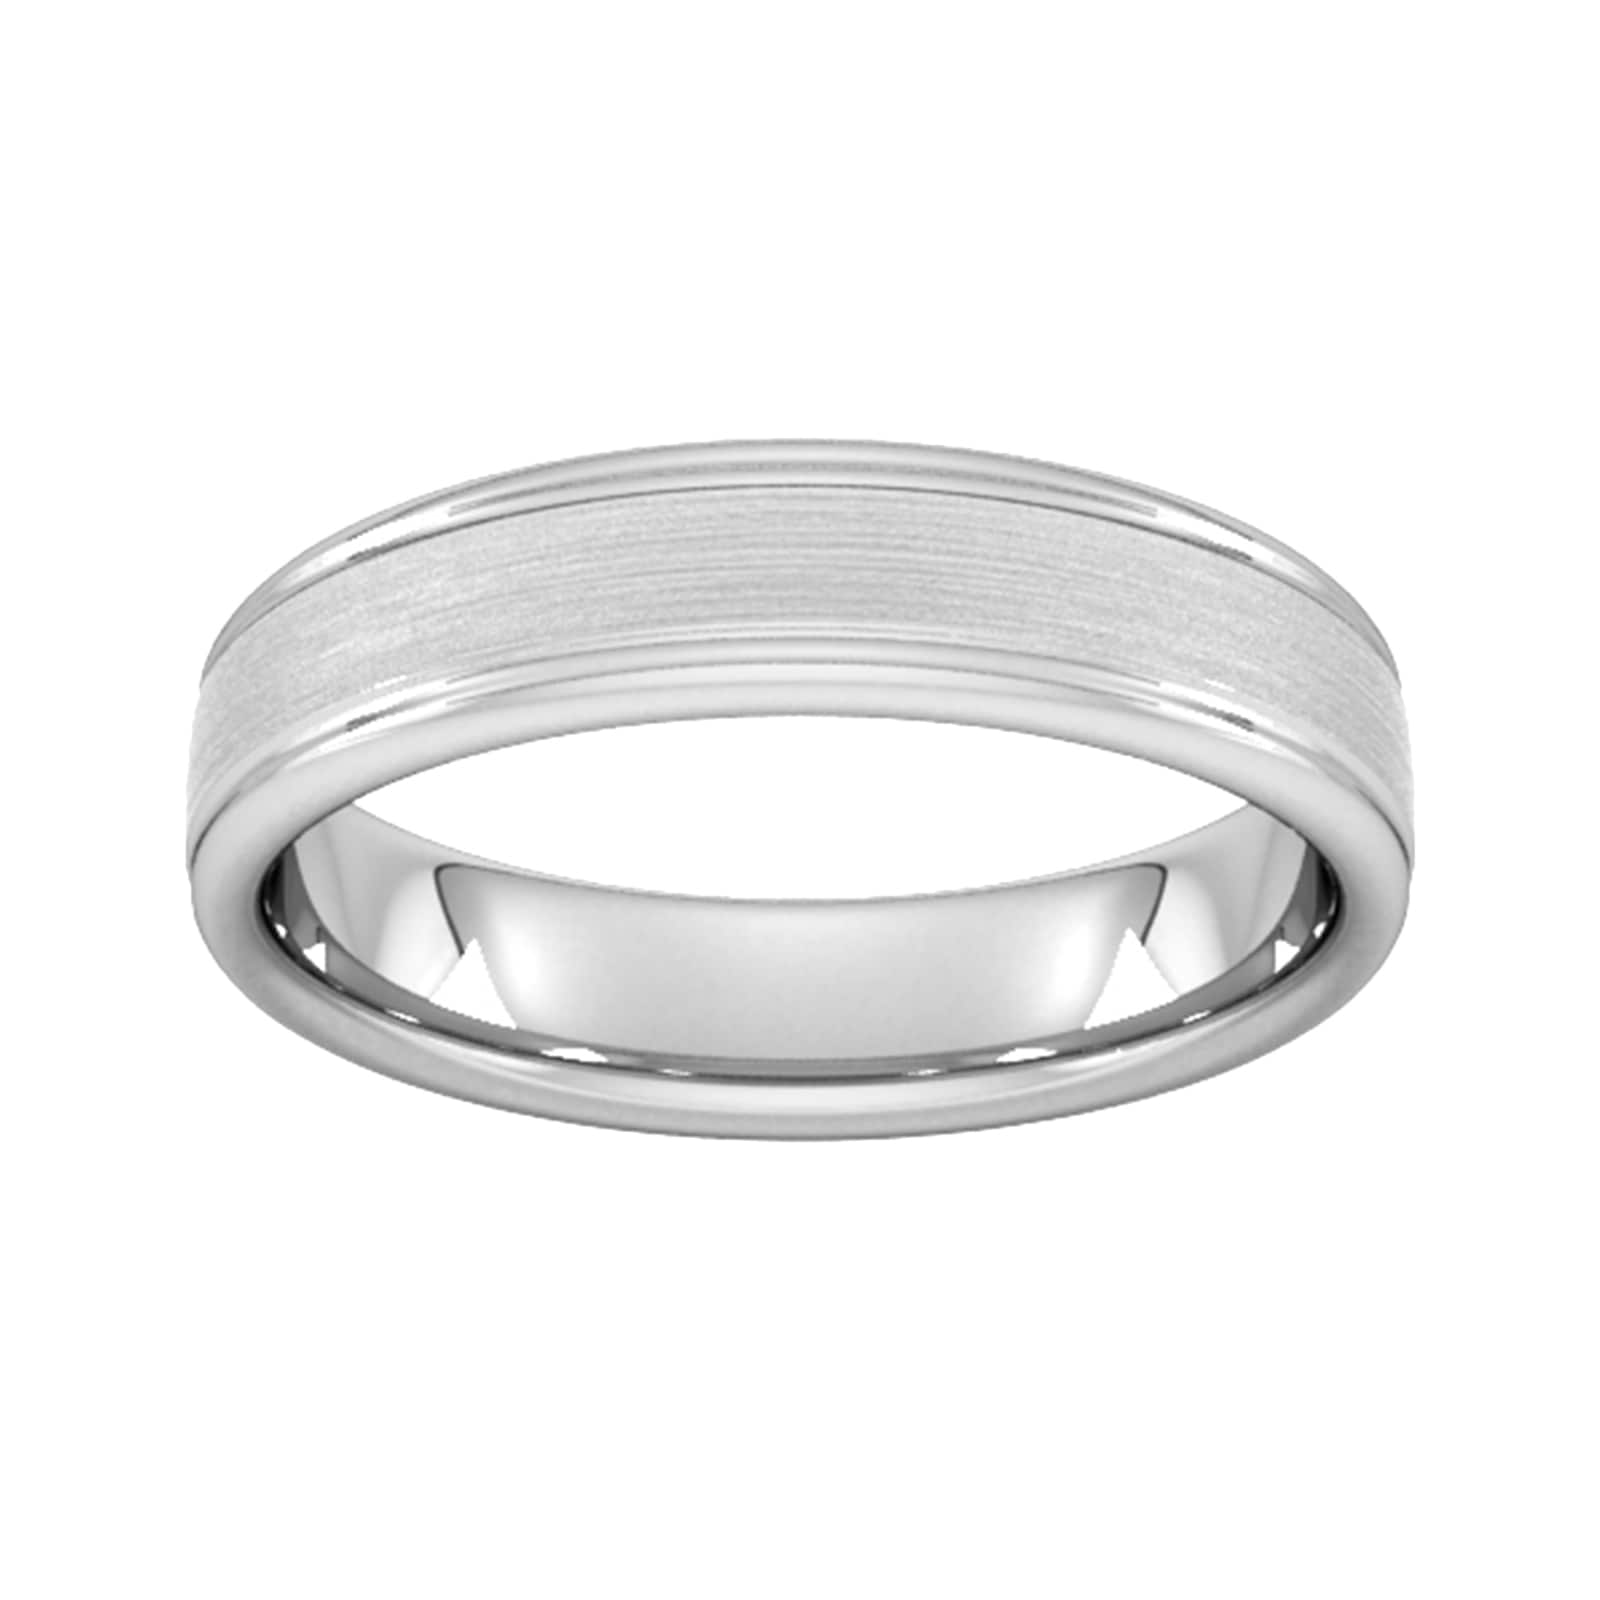 5mm D Shape Standard Matt Centre With Grooves Wedding Ring In 950 Palladium - Ring Size Y